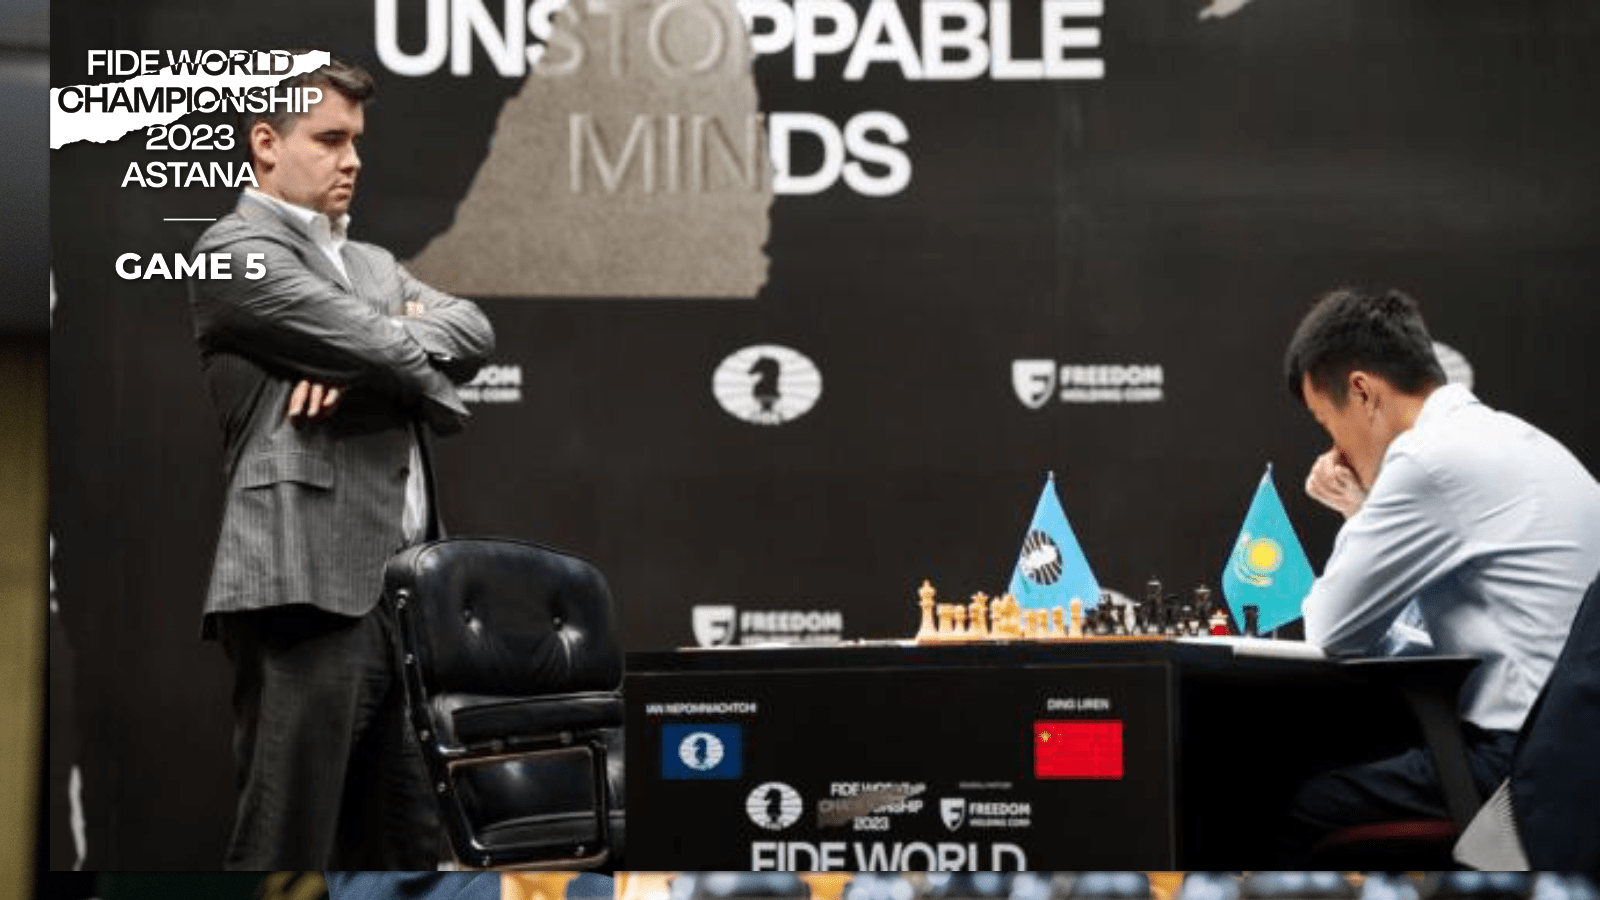 Ding and Nepomniachtchi all-square before final showdown